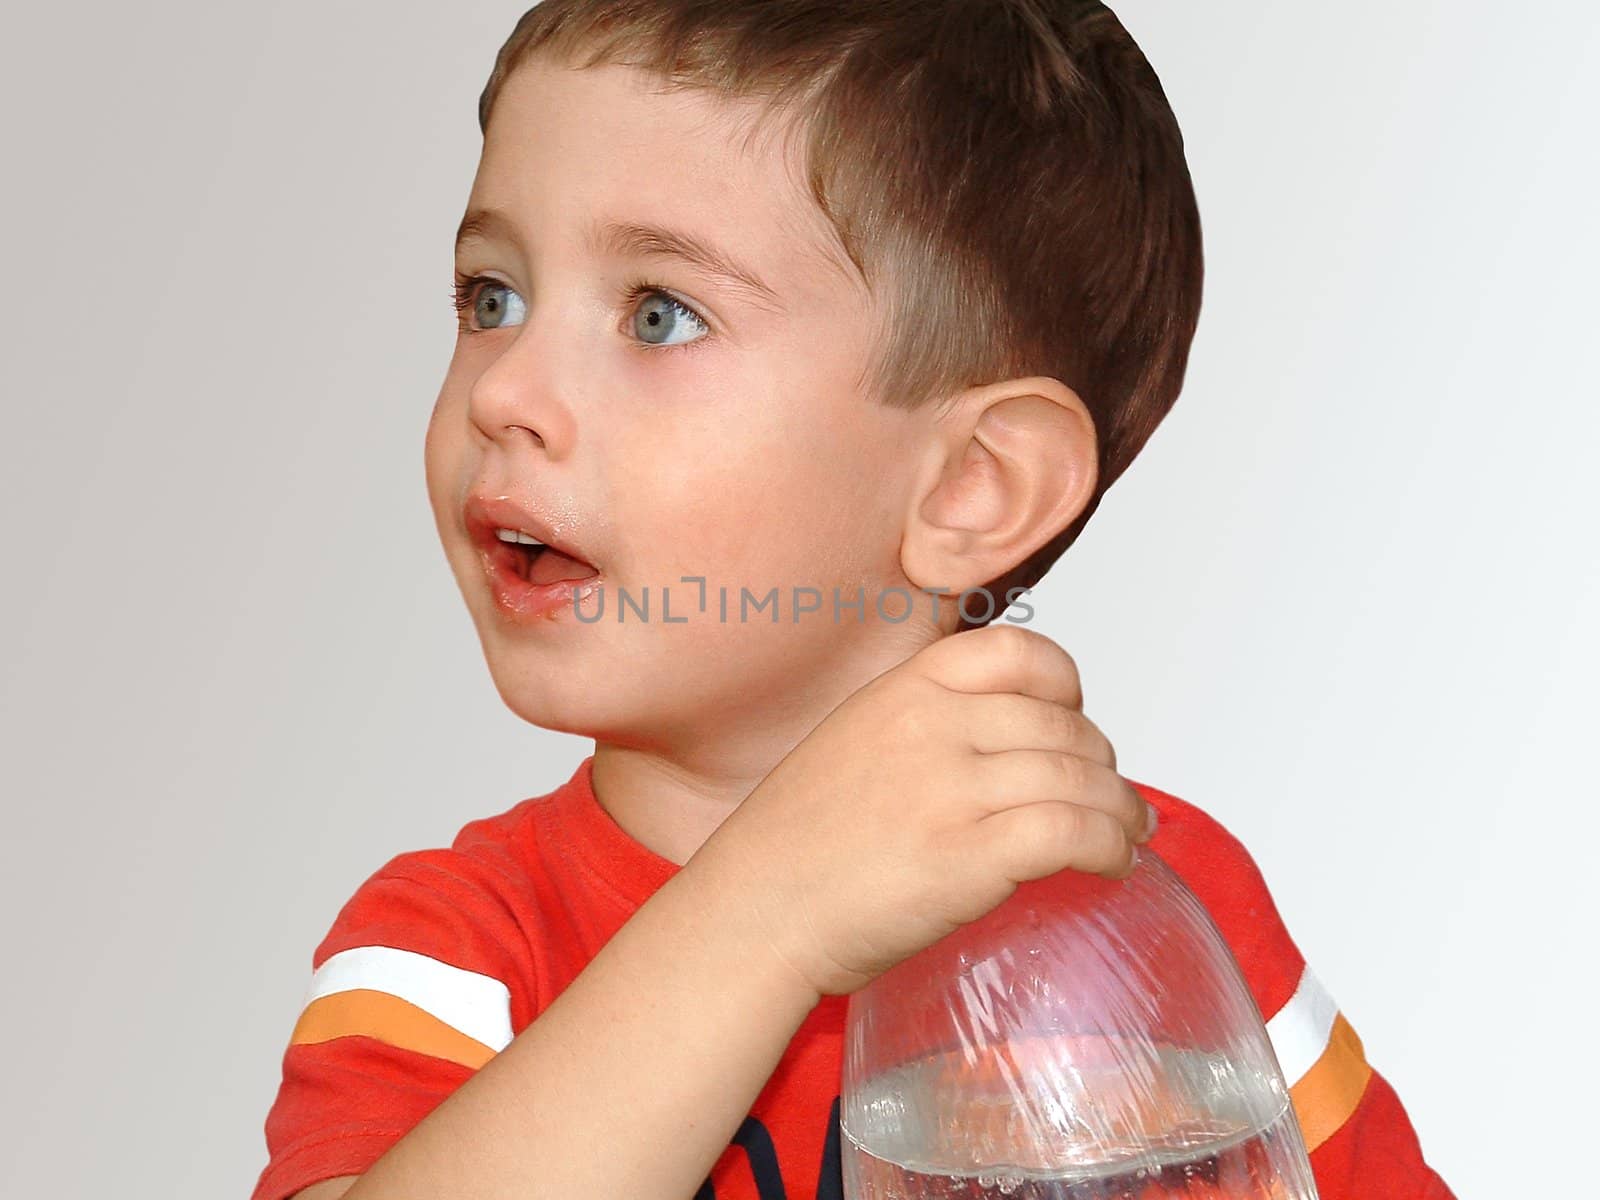  The boy with a bottle on a white background by myyayko